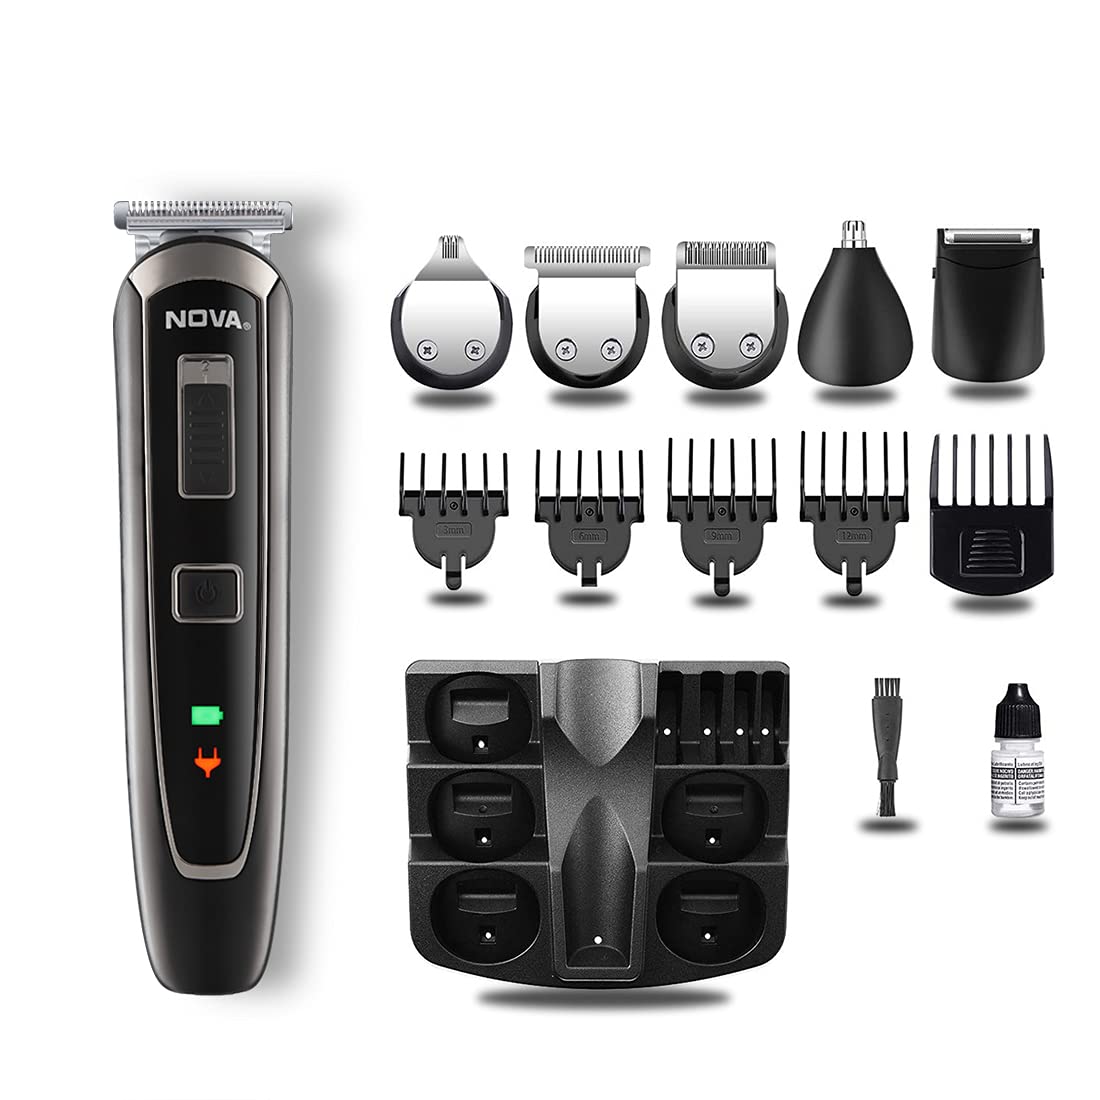 Nova NG 1150 Cordless and Rechargeable Multi Grooming Trimmer for Men